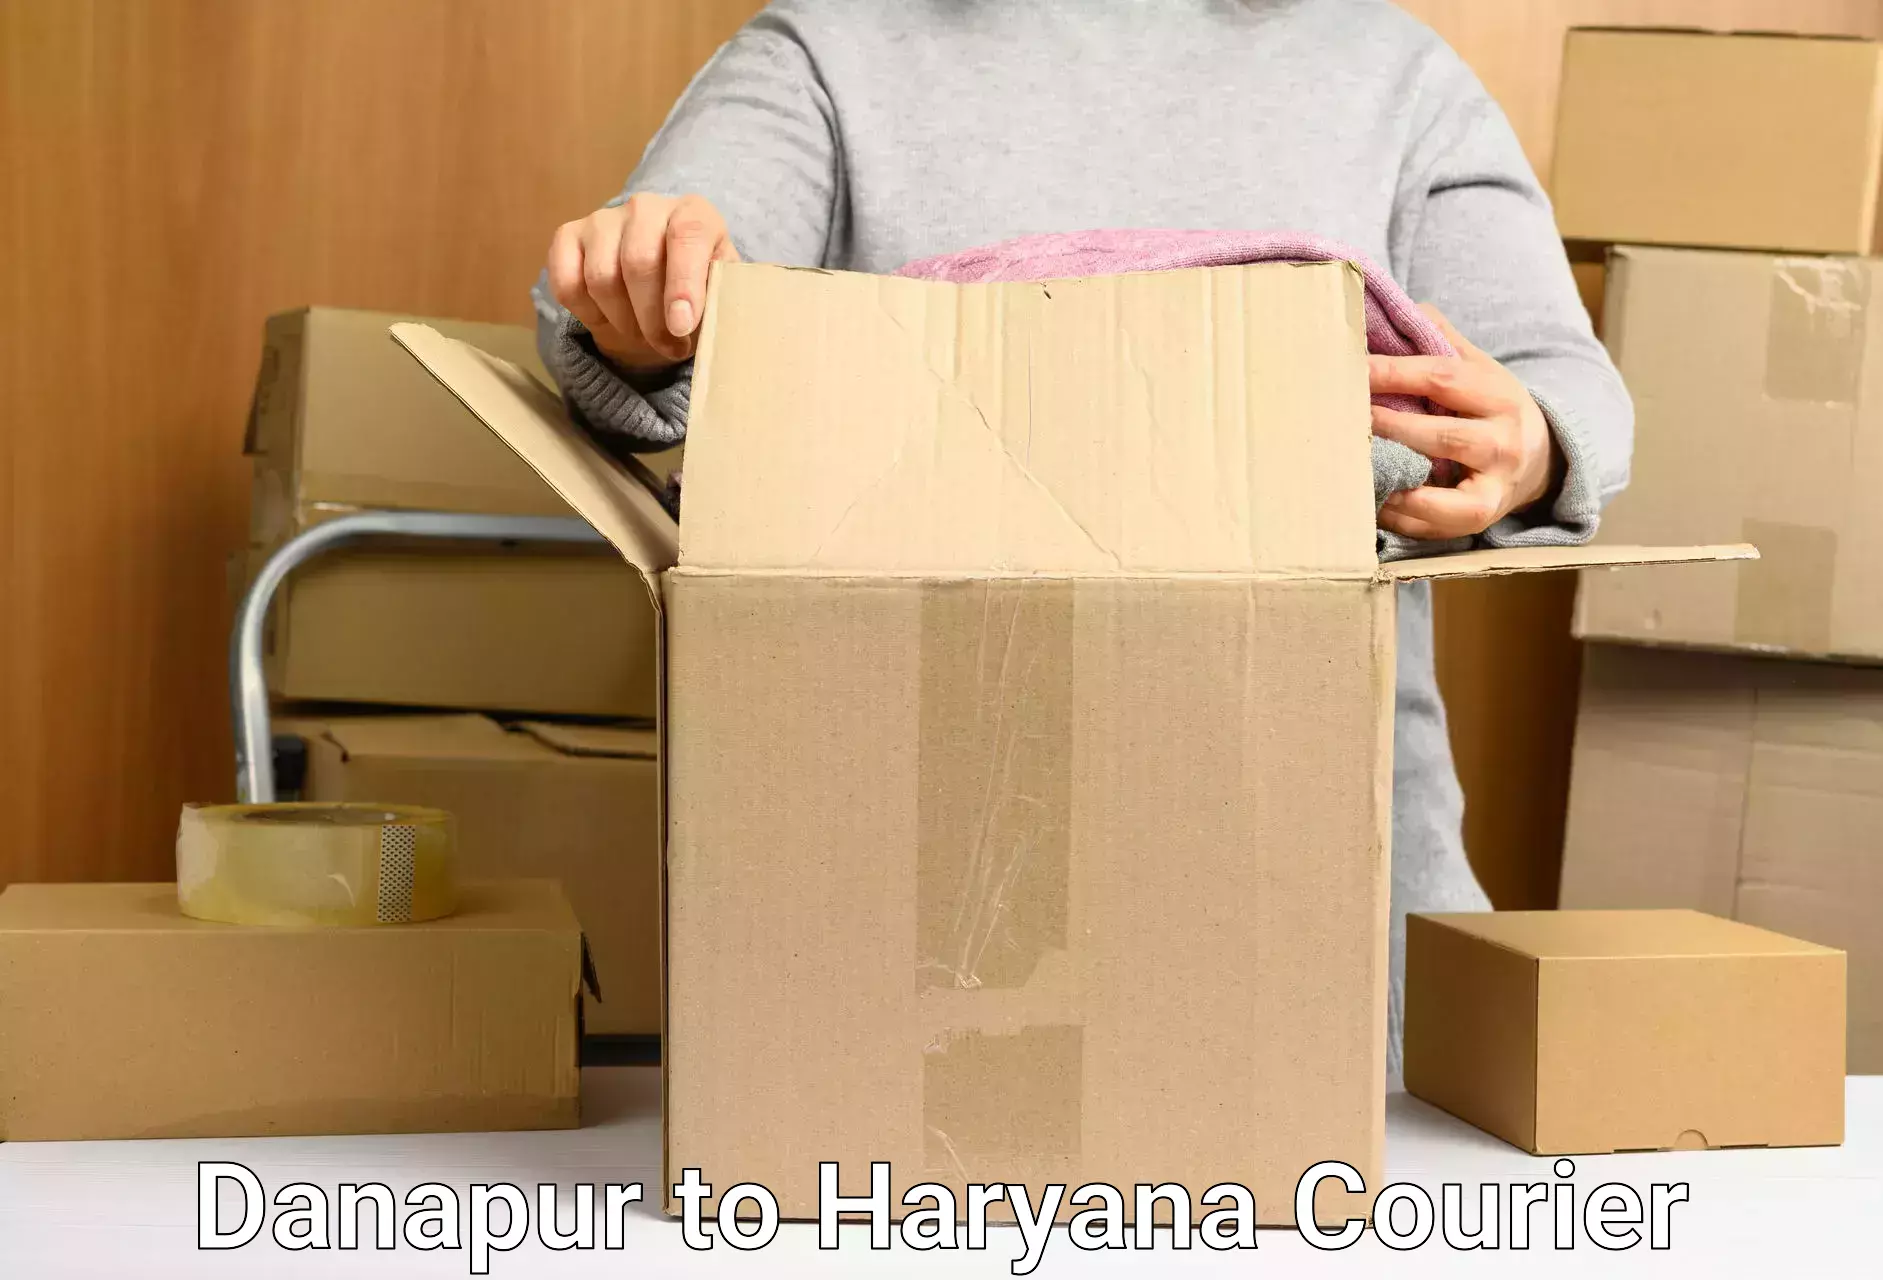 Global courier networks Danapur to Haryana